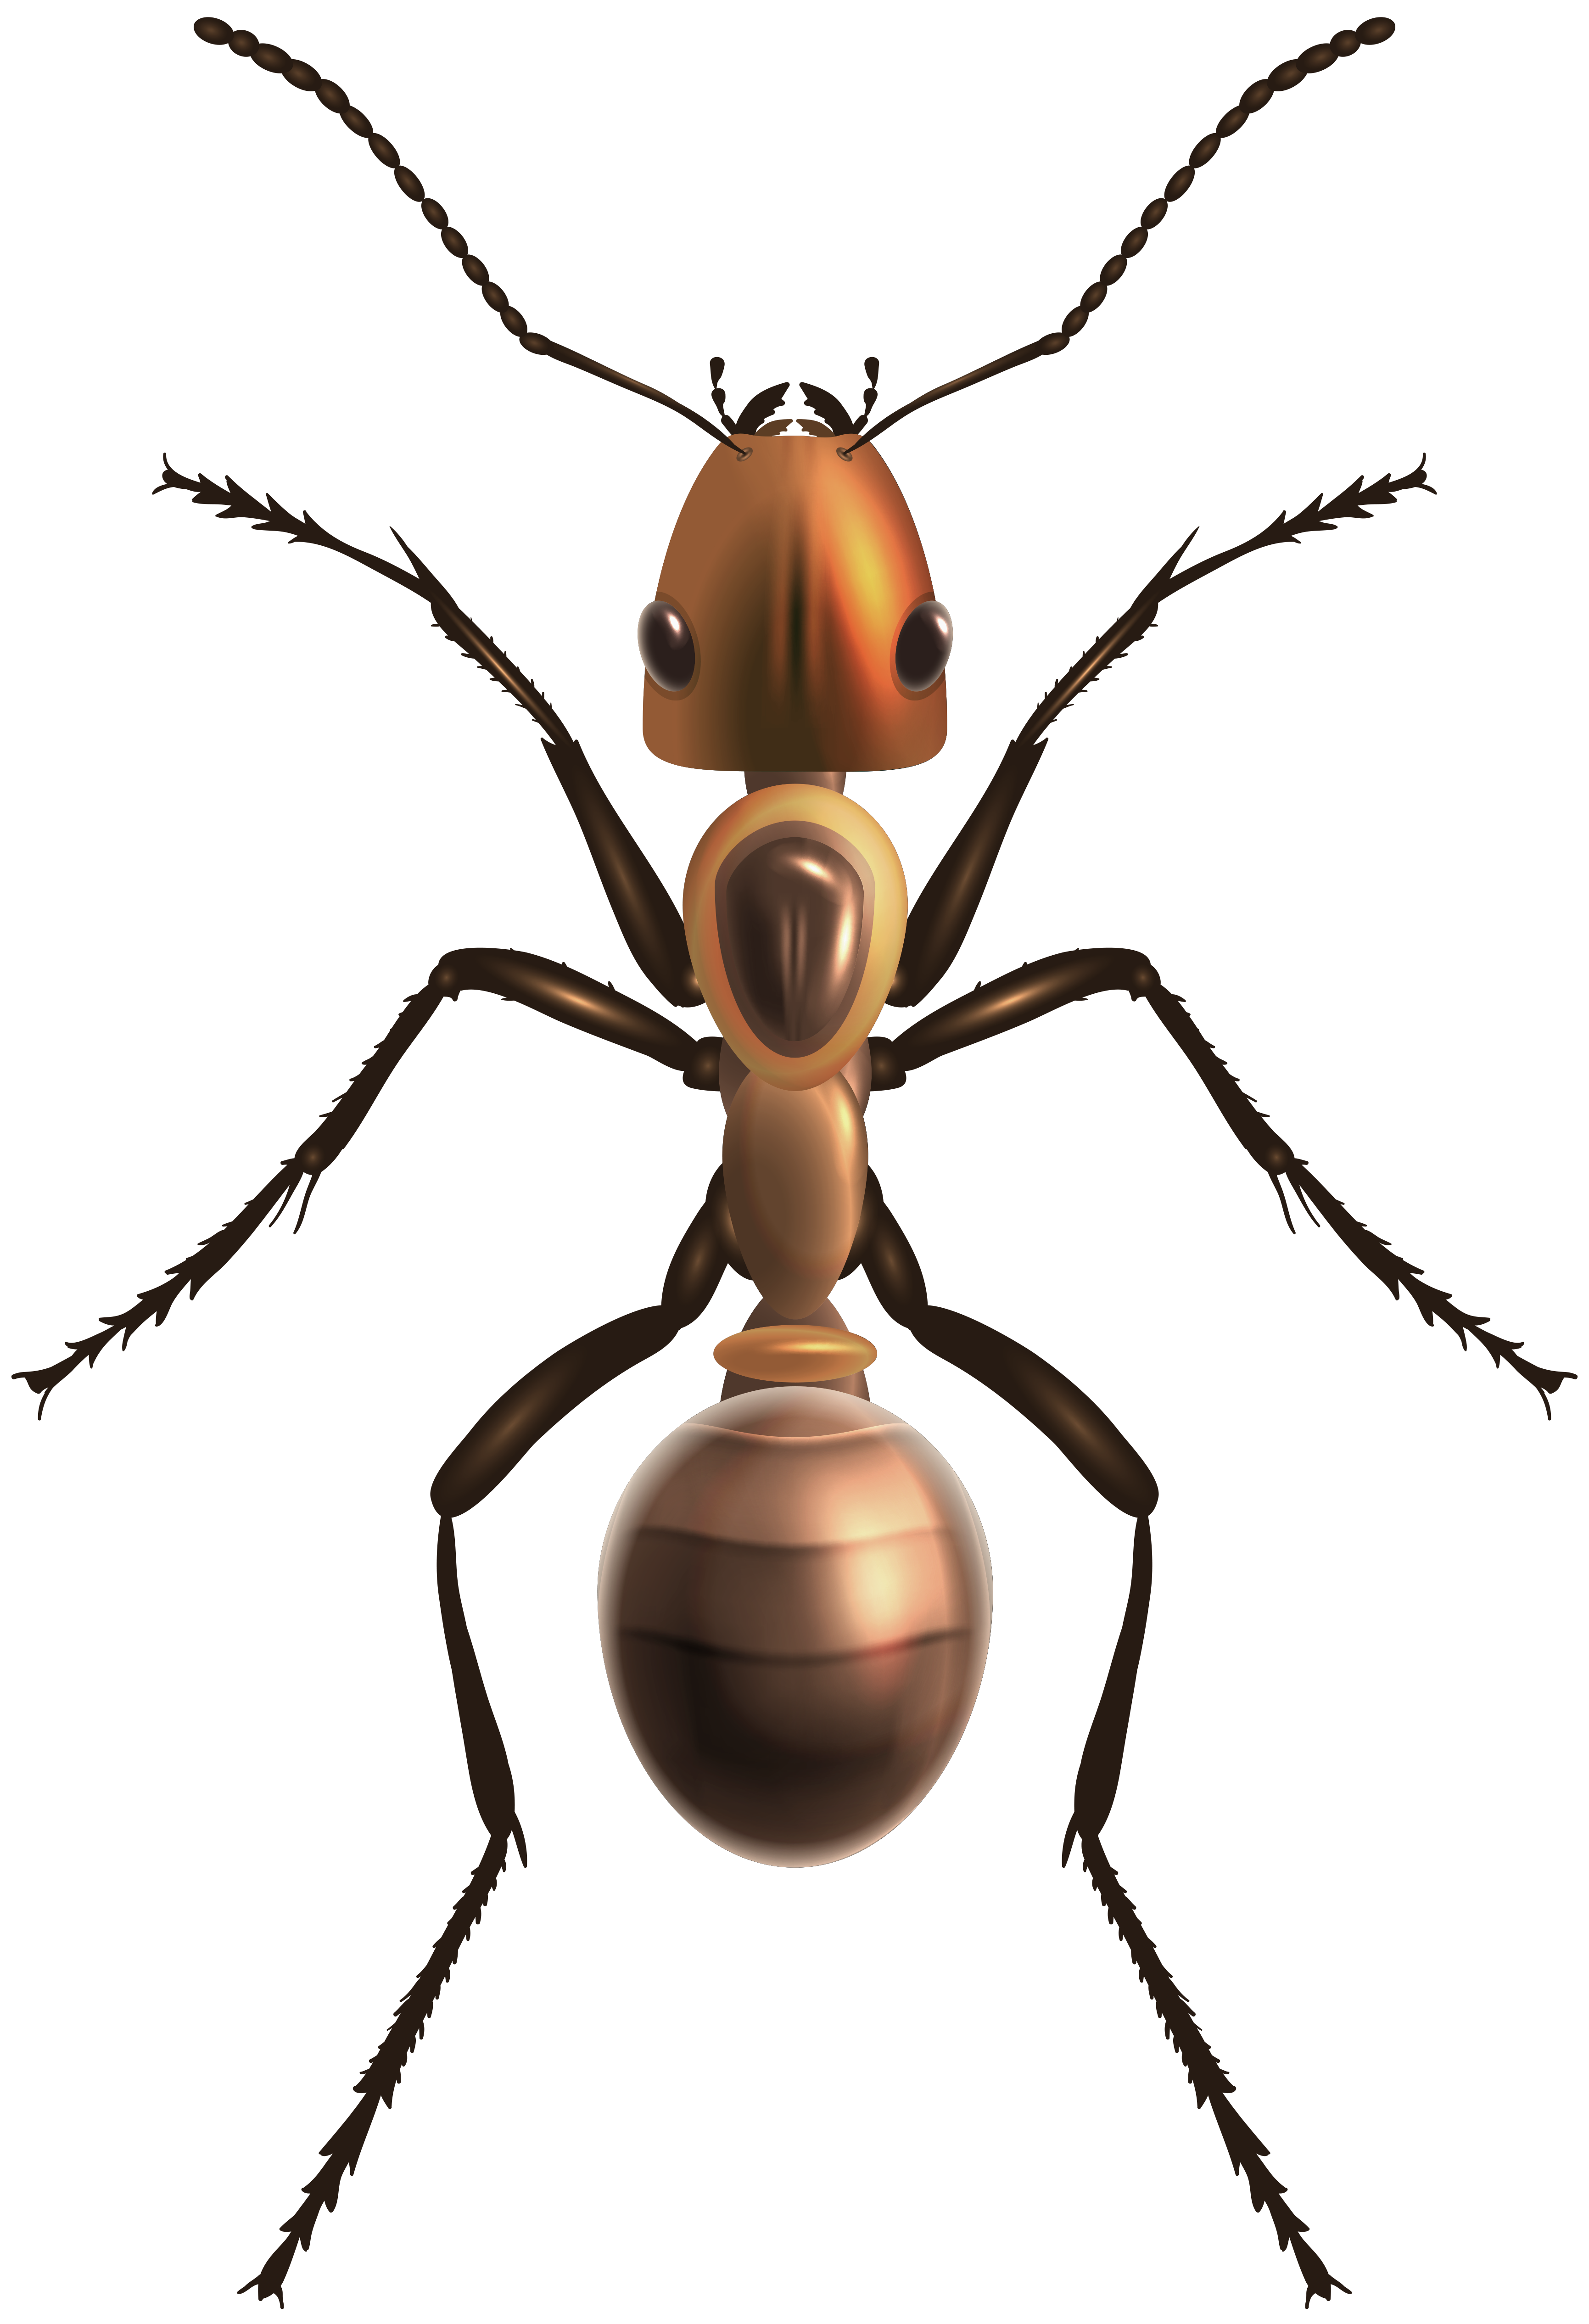 ant clipart high resolution